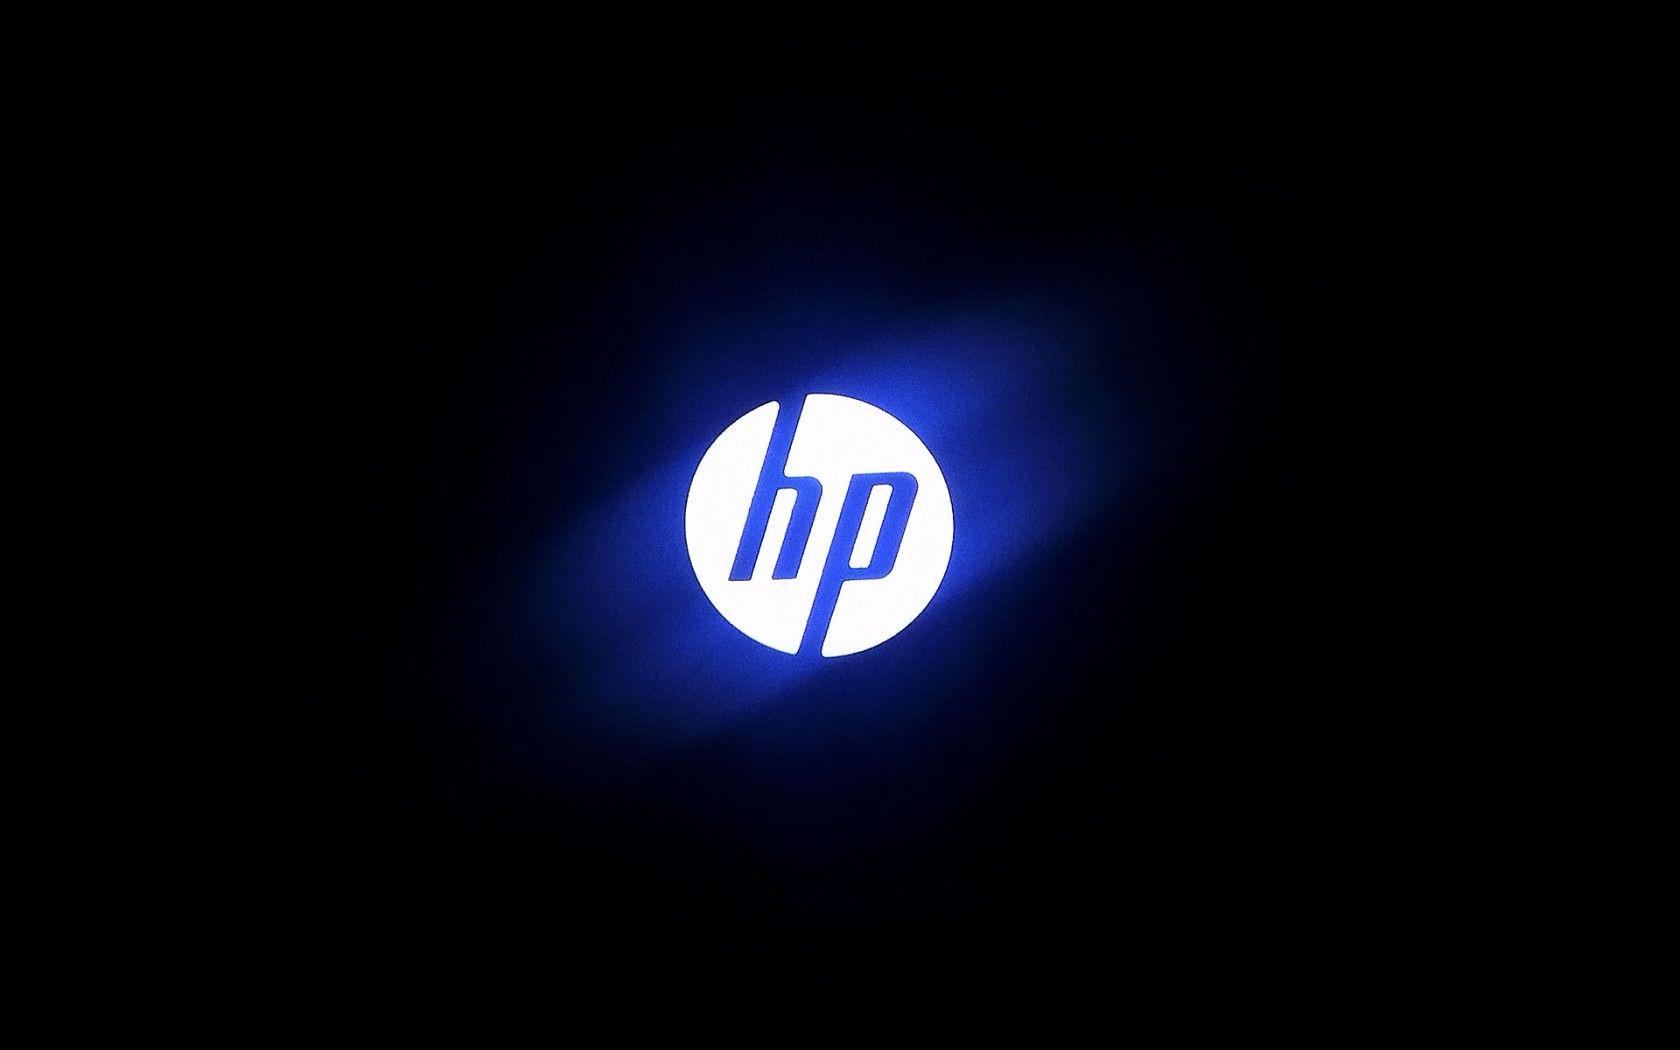 Where can i find HP Logo wallpaper